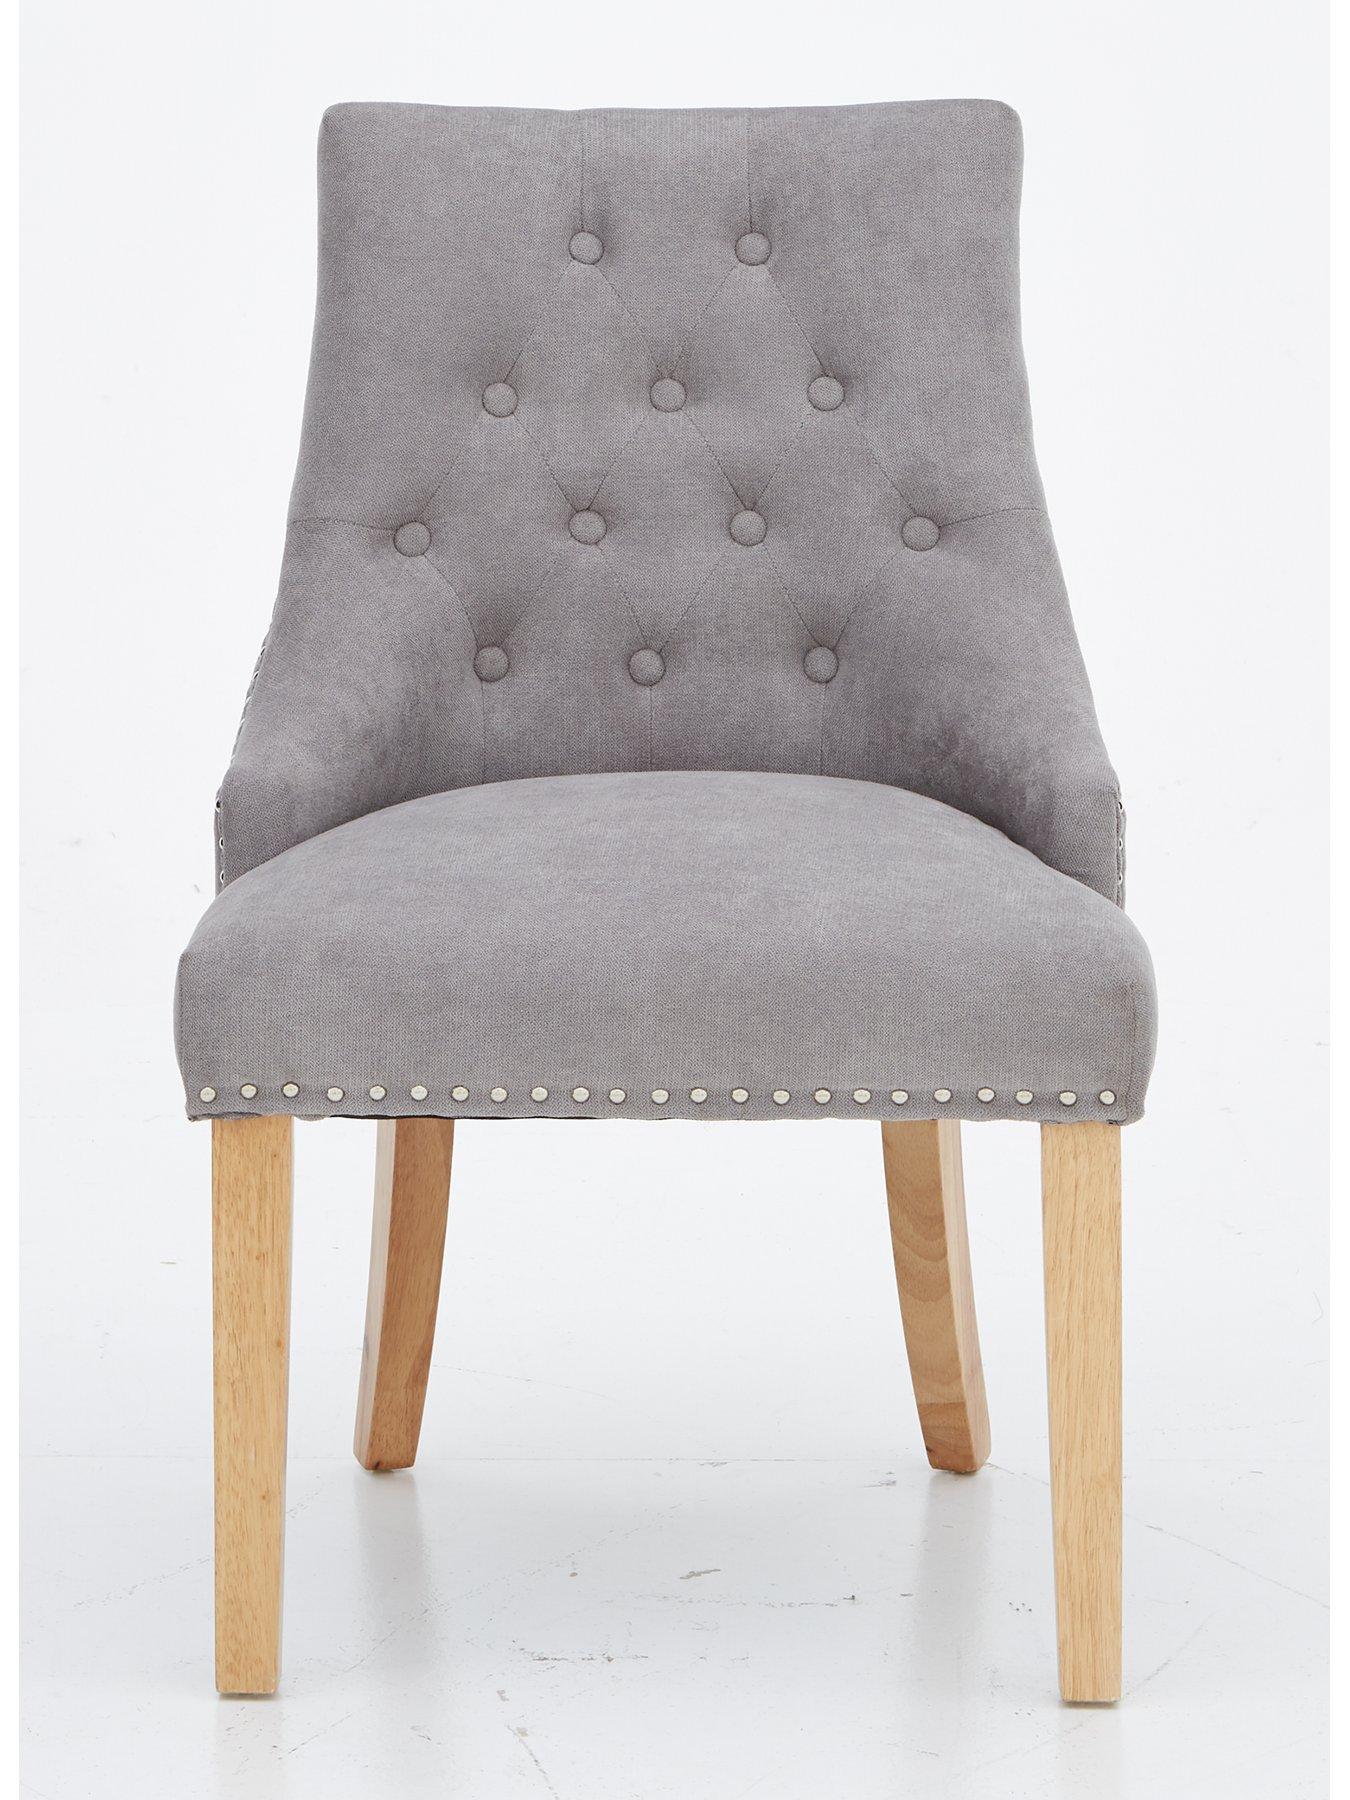 Grey | Dining chairs | Chairs | Home & garden | www.littlewoods.com